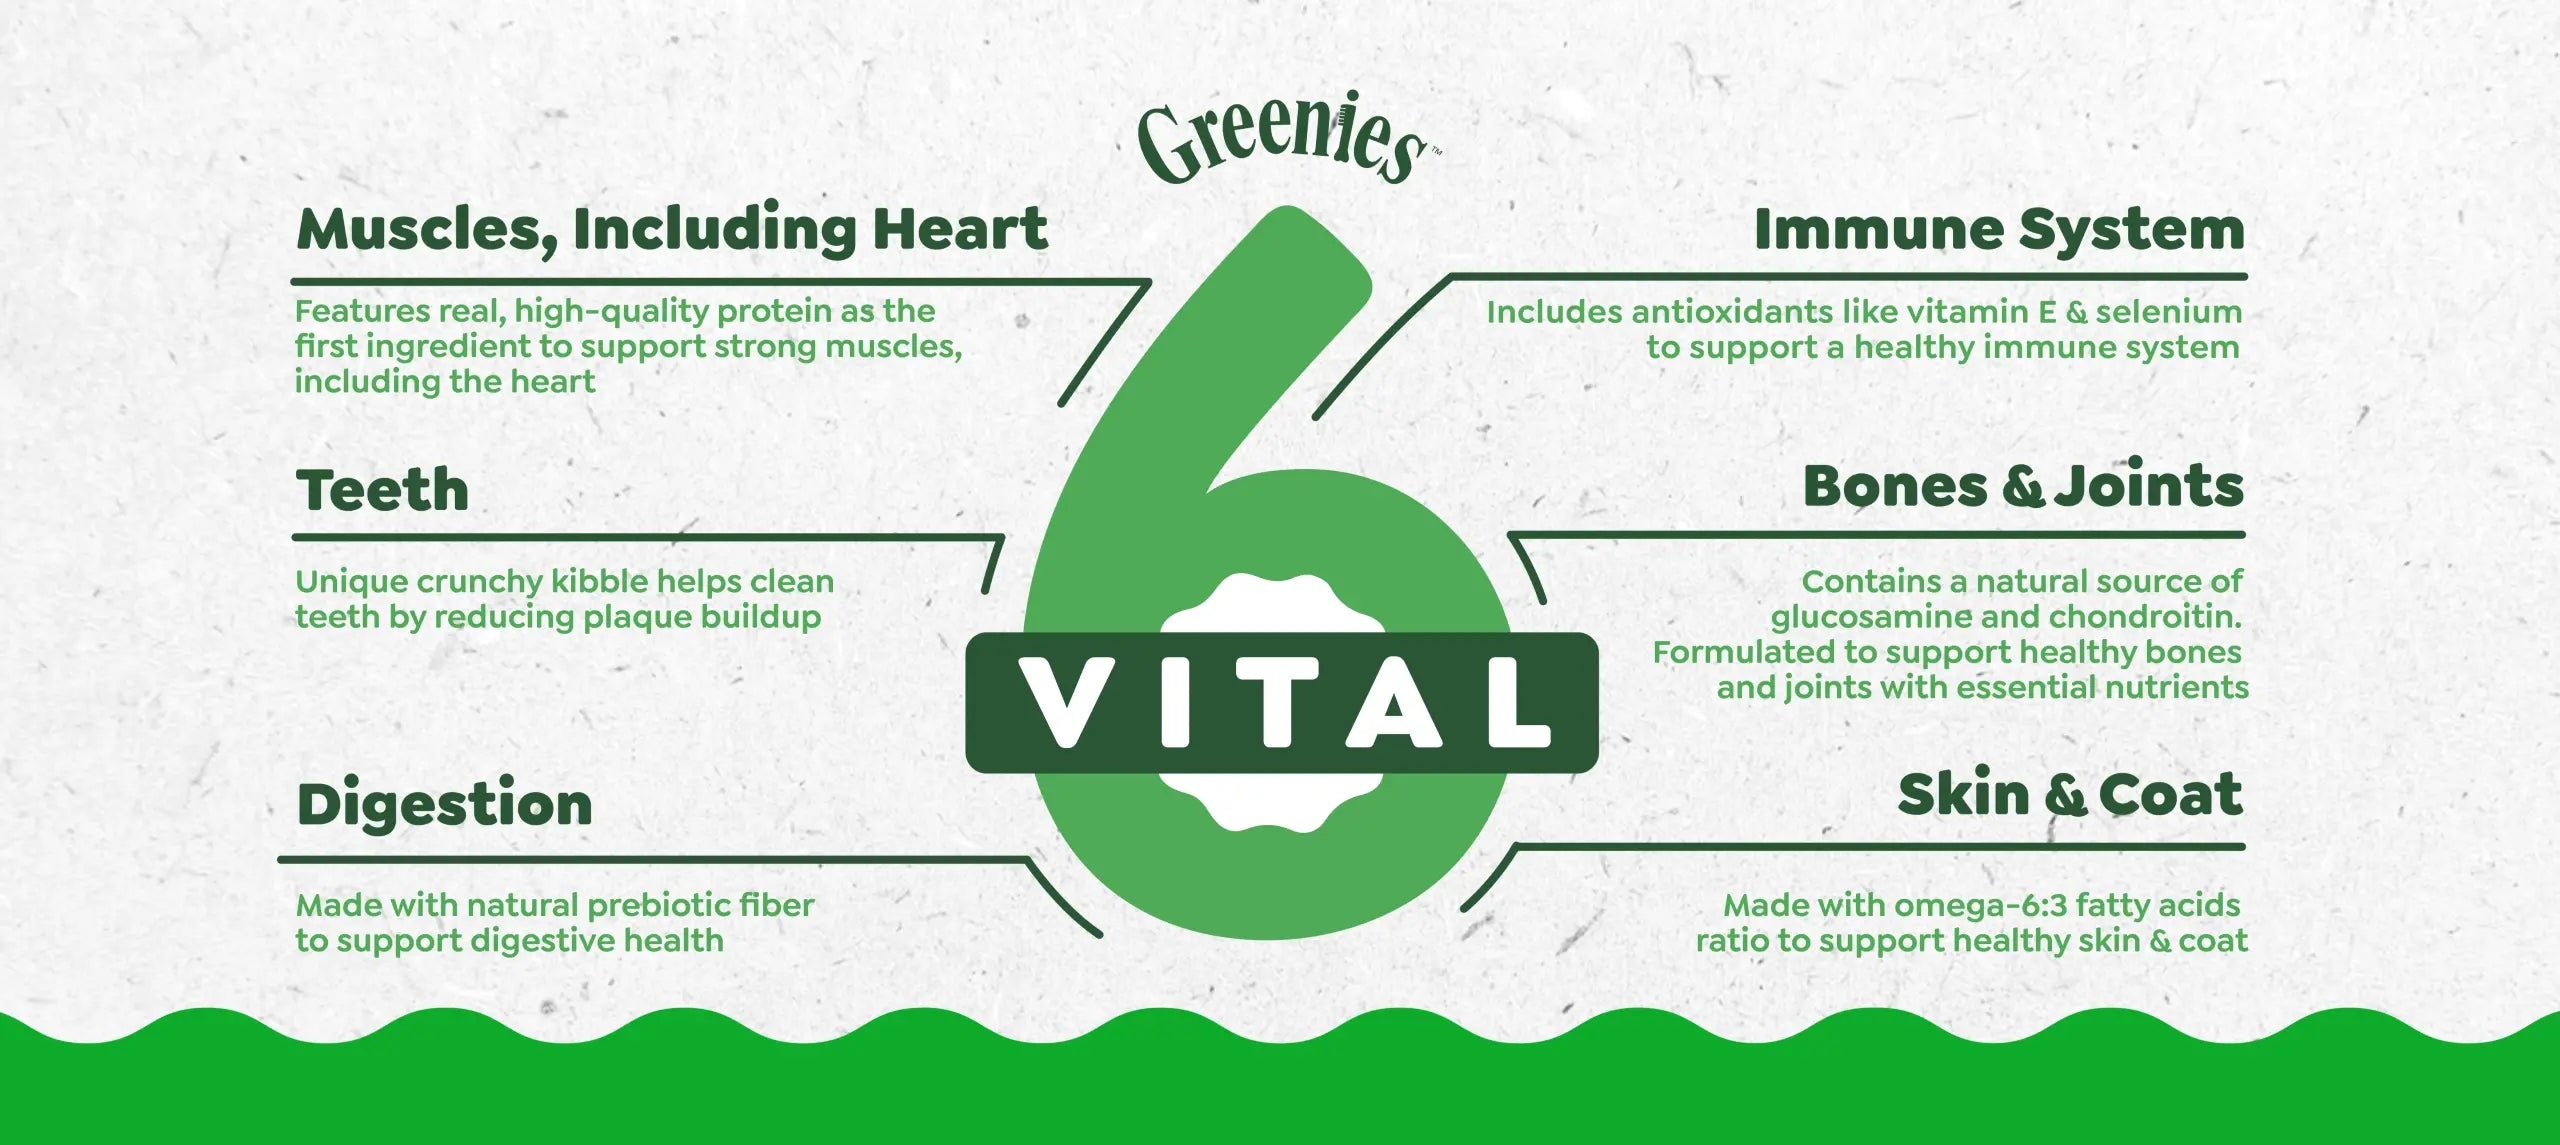 Graphic for Greenies' "Vital" pet health products, featuring a large green number 6 and text describing benefits for muscles, teeth, digestion, immune system, bones and joints, and skin and coat.